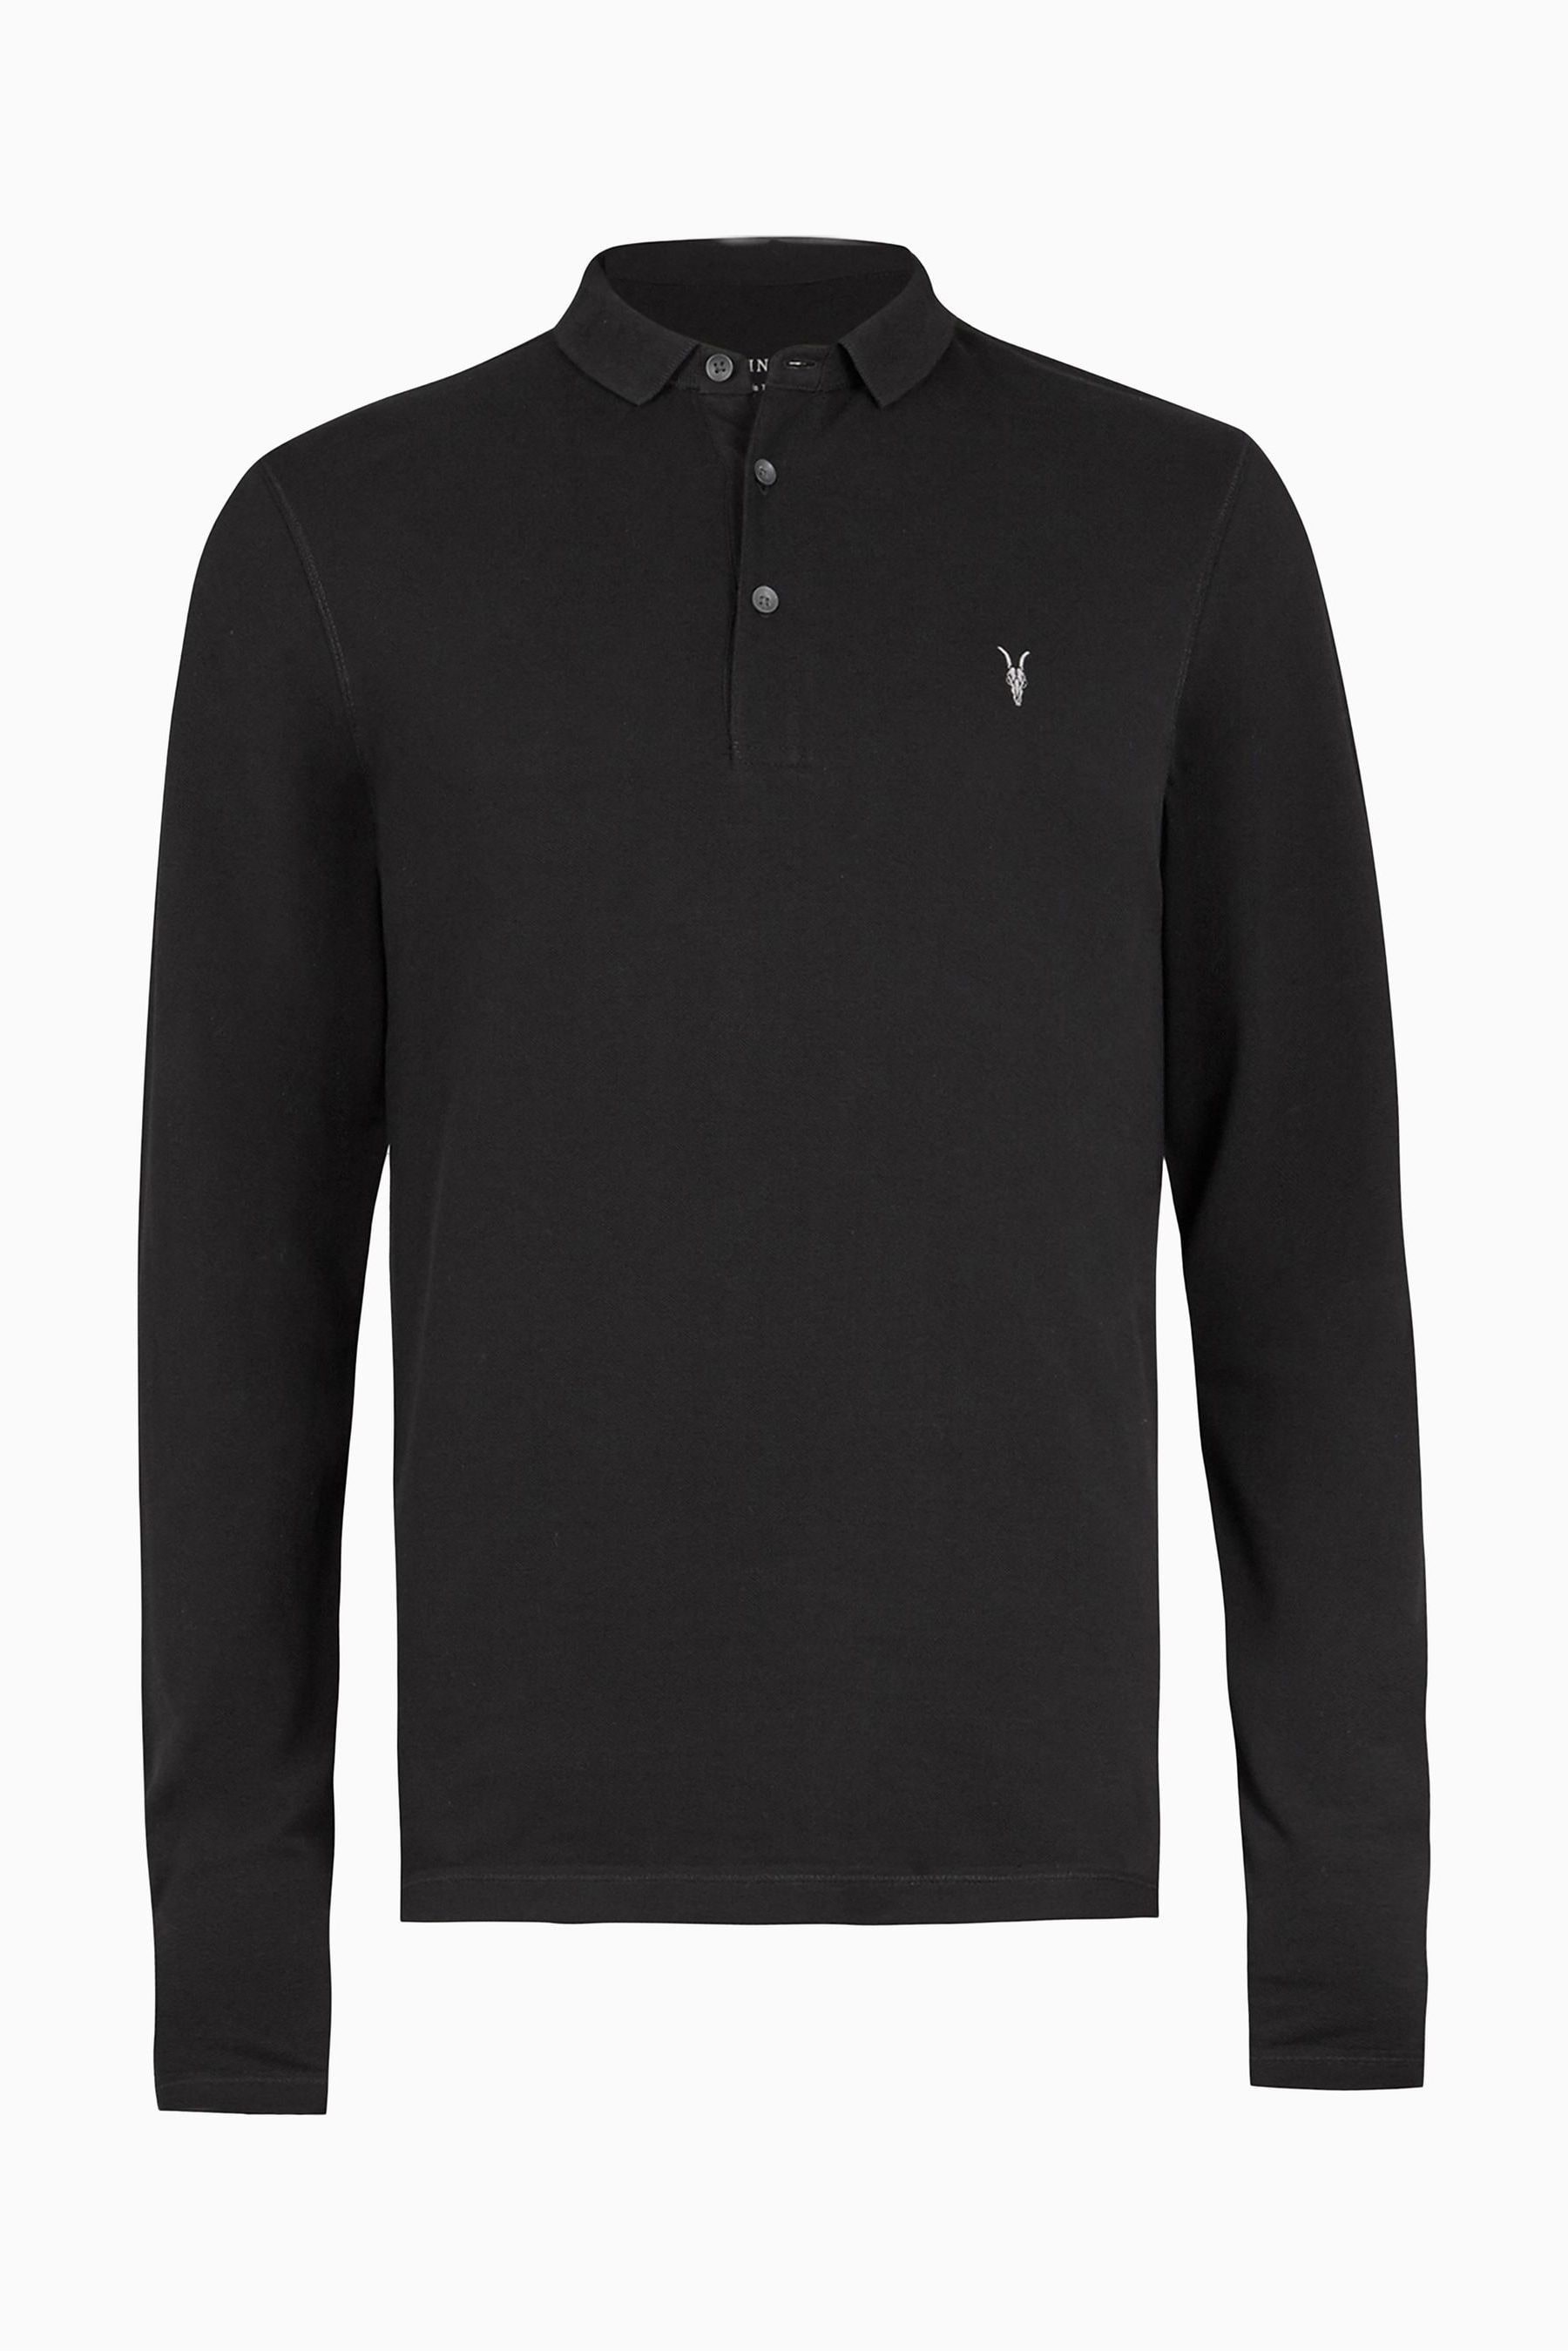 Buy AllSaints Black Reform Polo Shirt from the Next UK online shop